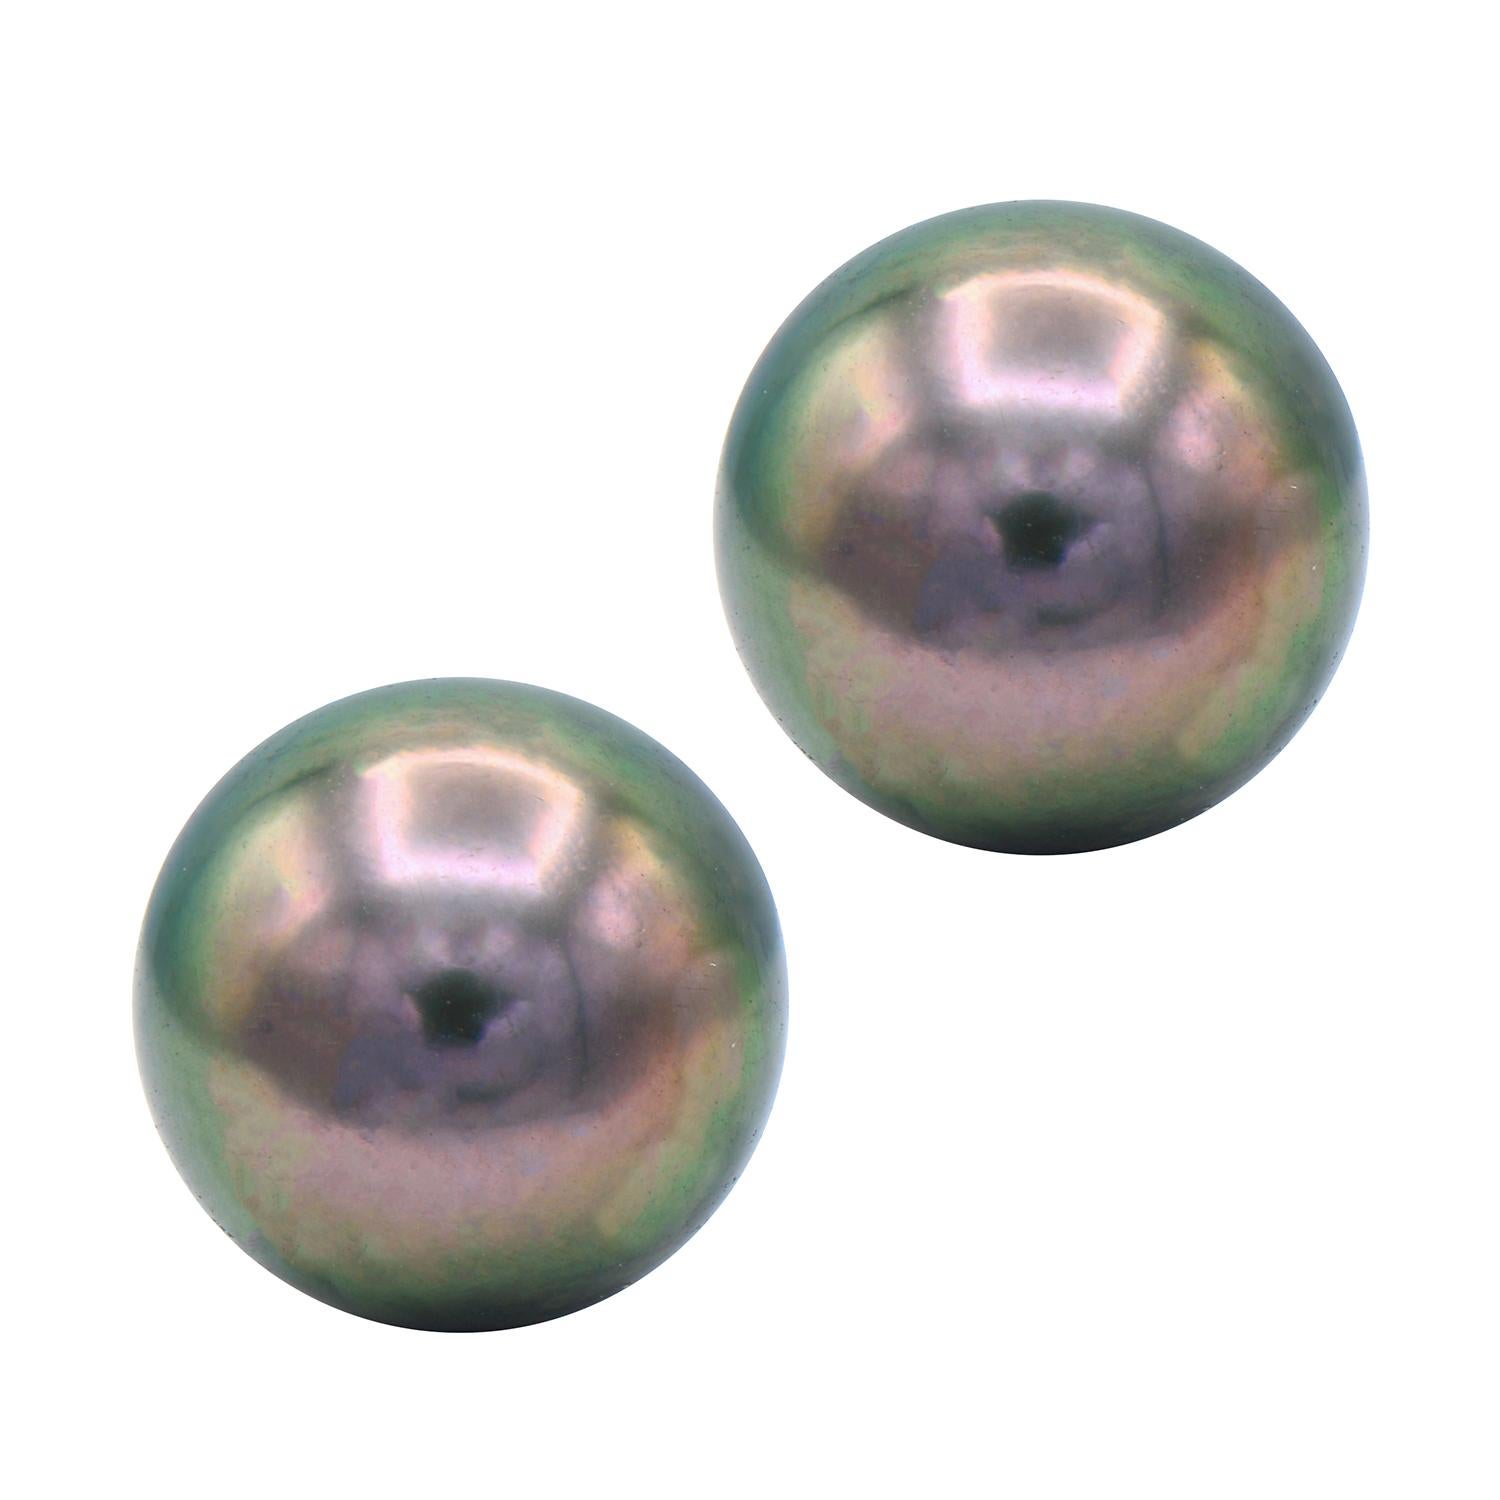 Tahitian Pearl Studs give a little twist to the classic white pearl studs. The Tahitian Pearl Studs are expertly matched in color, luster, and size to make a perfect pair. These 10-10.5mm beautiful pearls are set in 14-karat white gold.